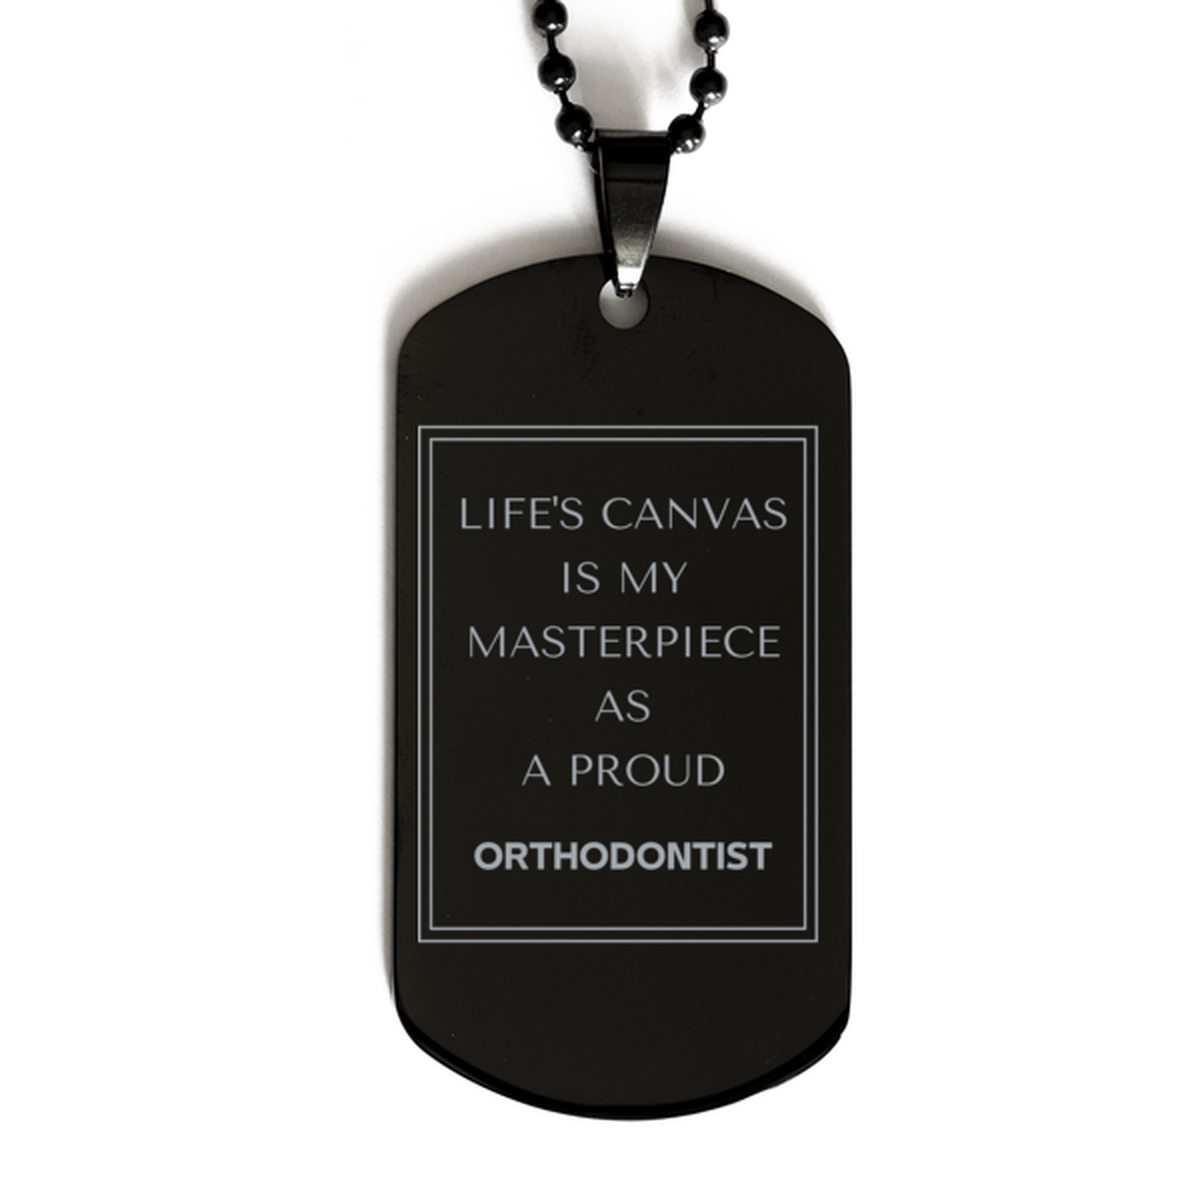 Proud Orthodontist Gifts, Life's canvas is my masterpiece, Epic Birthday Christmas Unique Black Dog Tag For Orthodontist, Coworkers, Men, Women, Friends